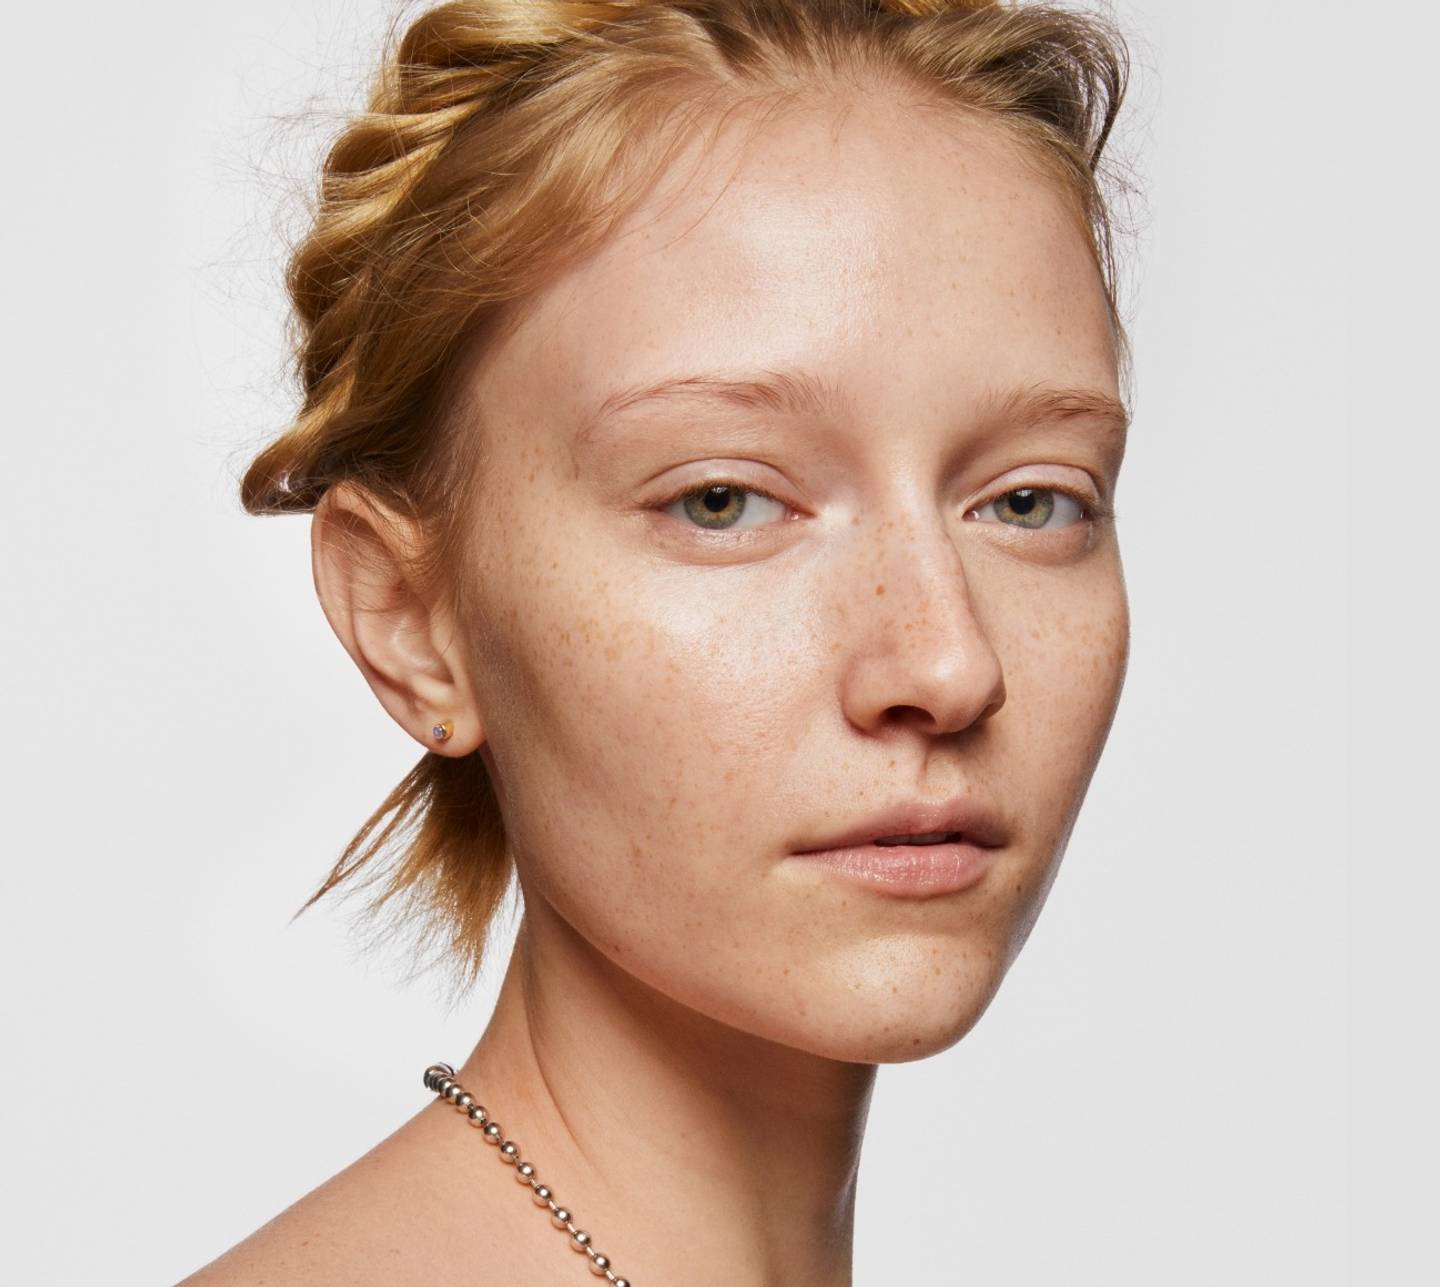 Fresh-faced model poses with skin cleansed with Milk Makeup Vegan Milk Cleanser. She is against a white background.